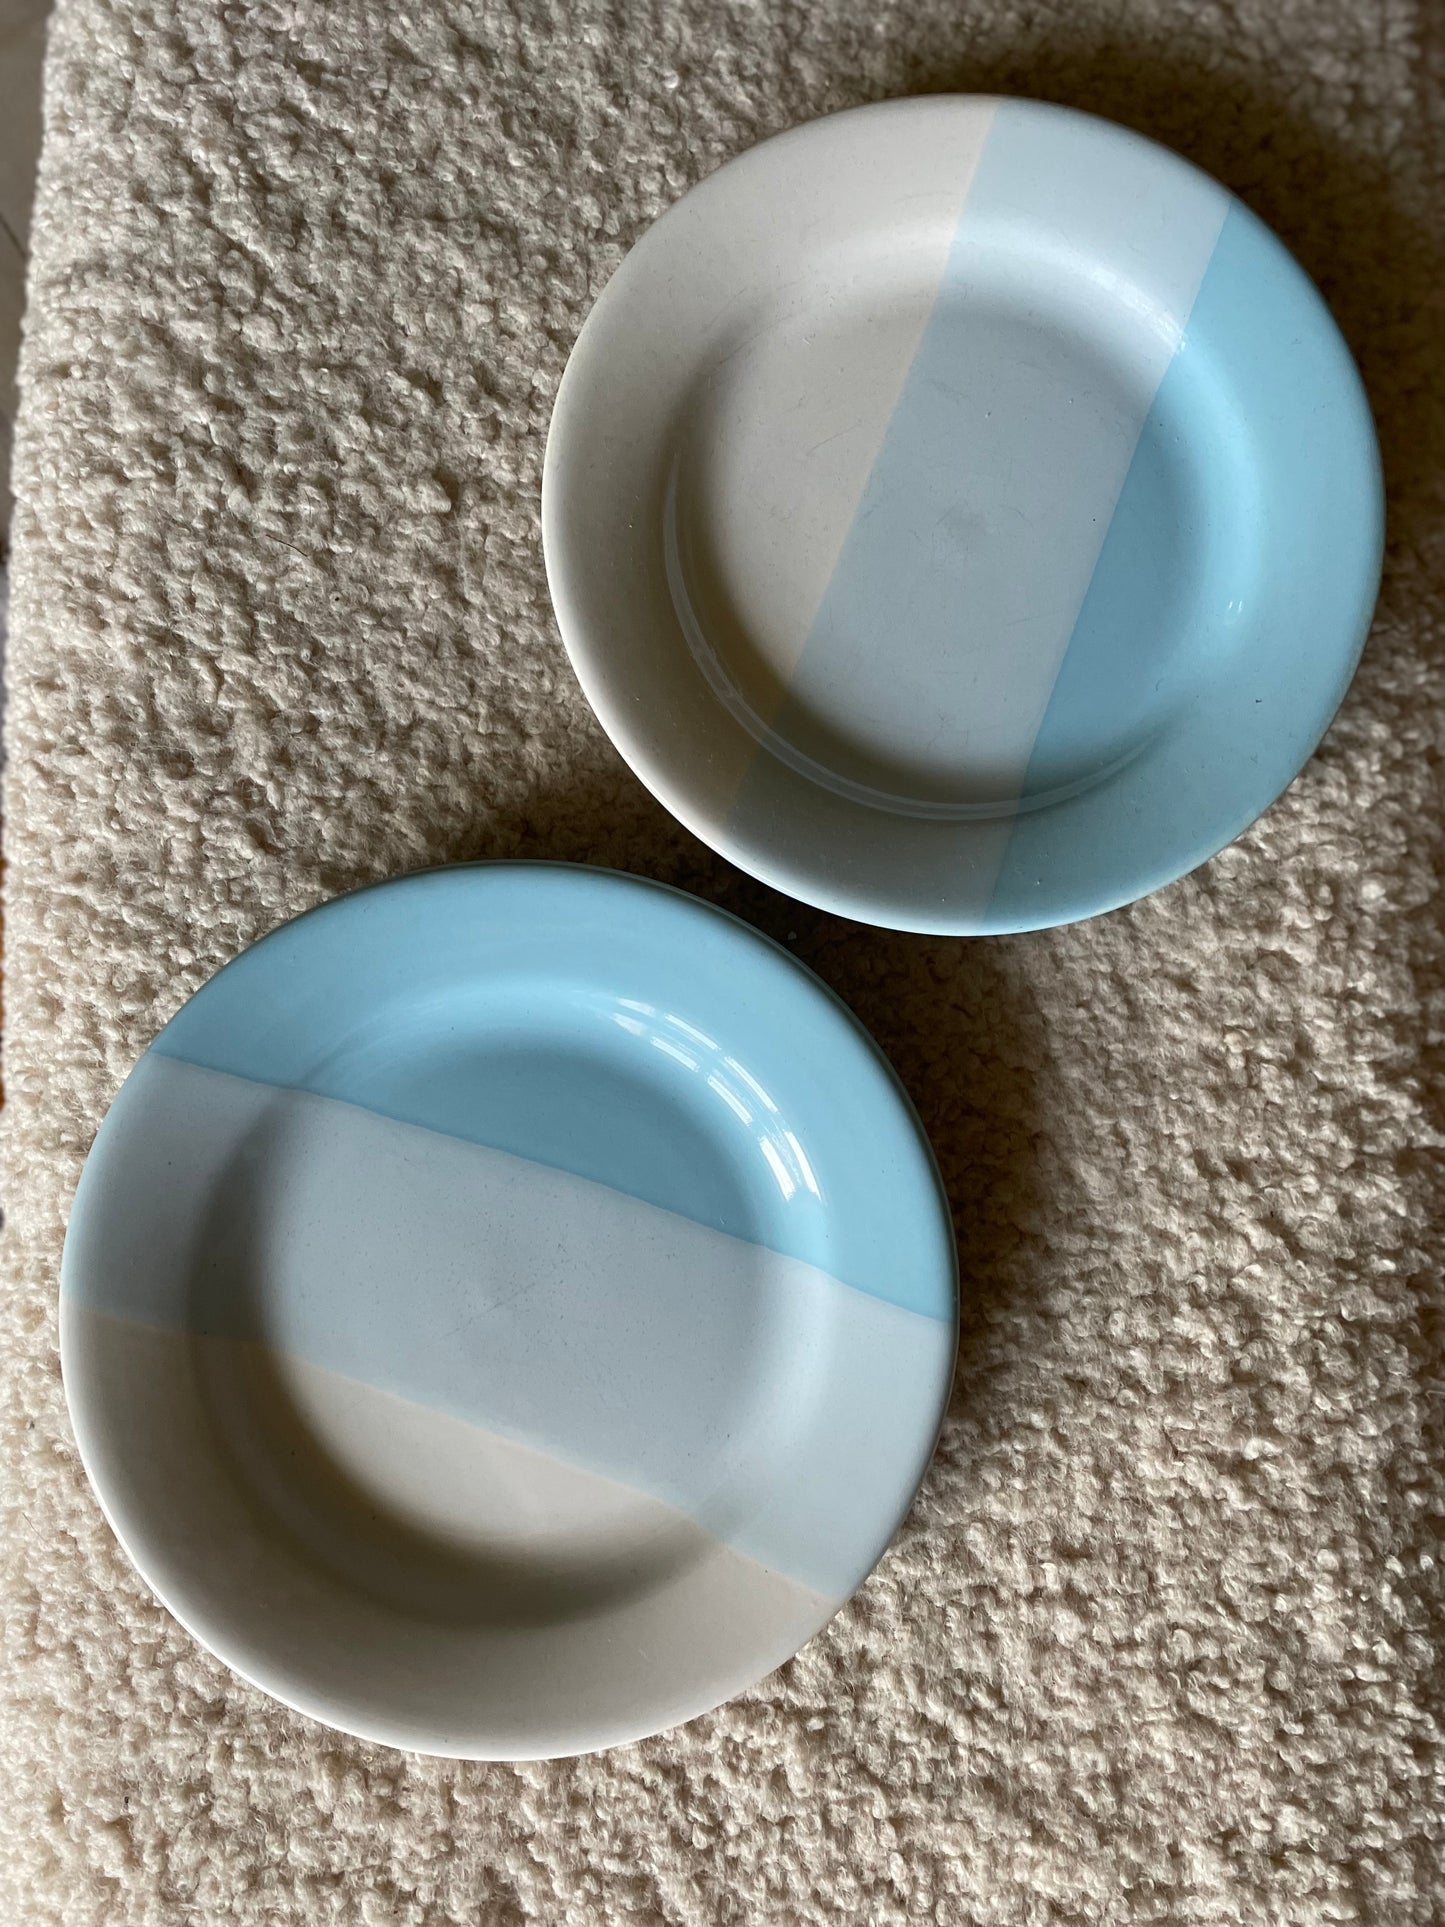 Lunch plates in striped shades of blue